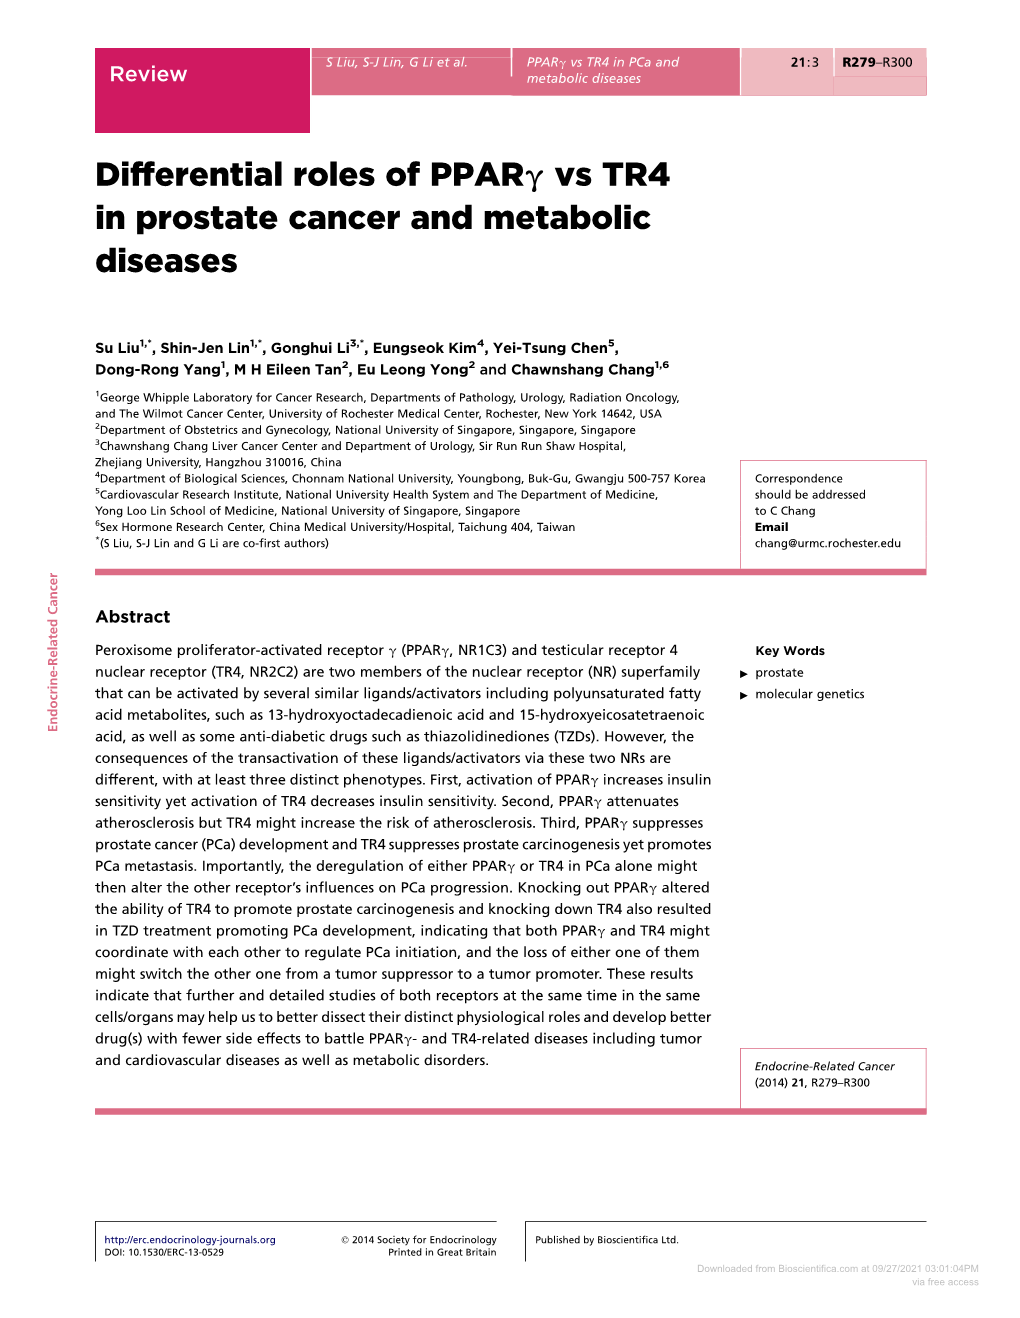 Differential Roles of Pparg Vs TR4 in Prostate Cancer and Metabolic Diseases